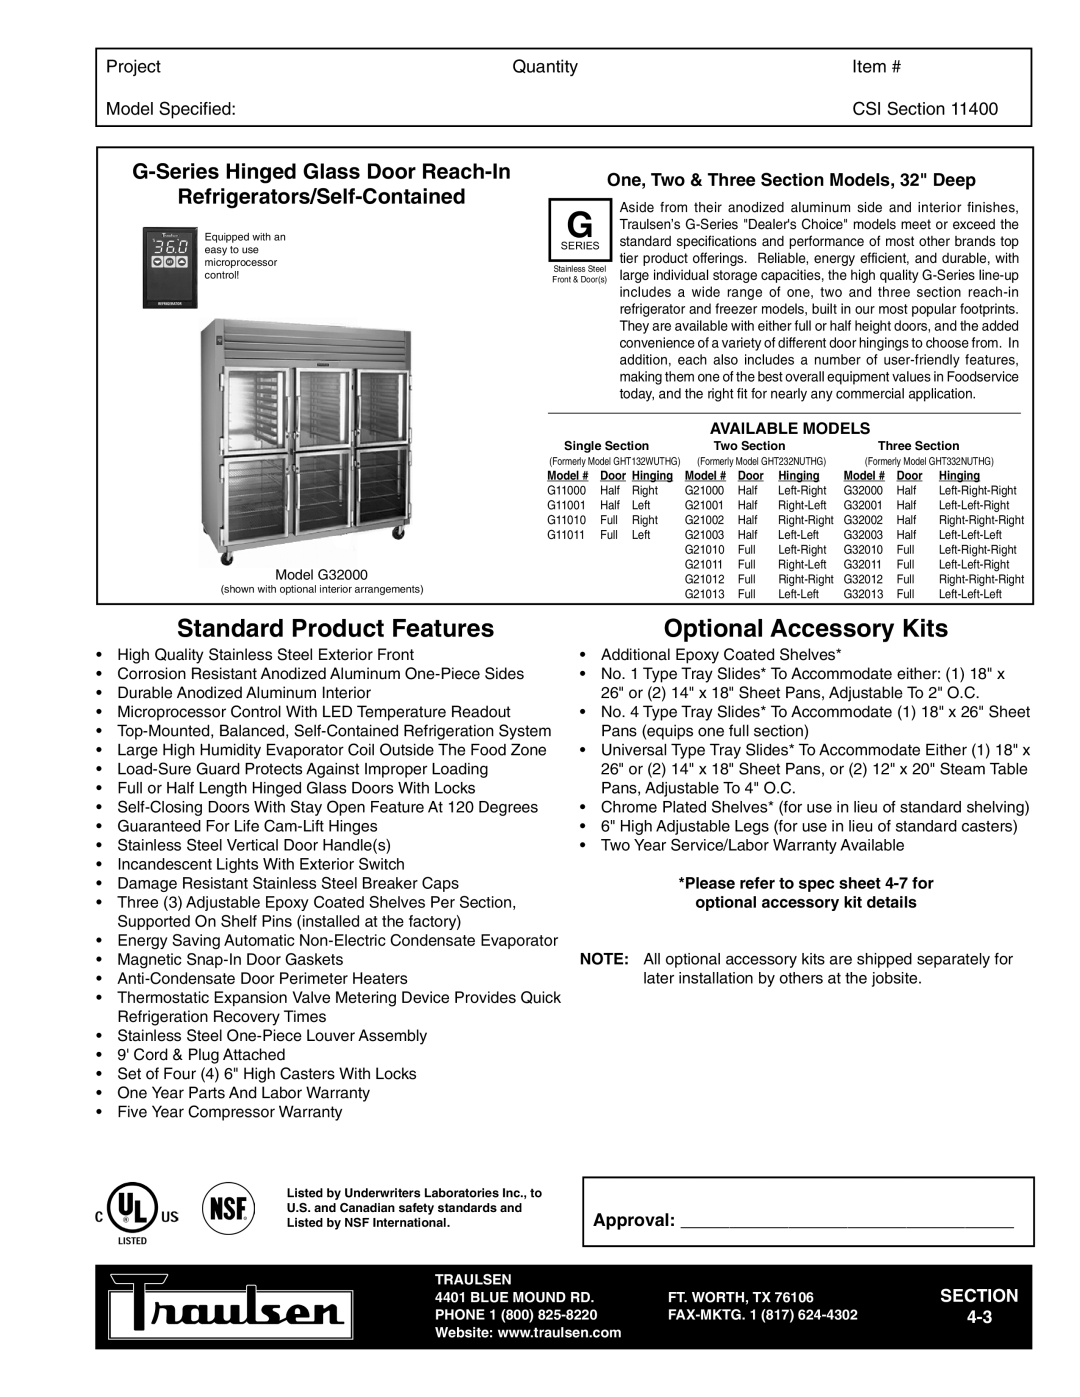 Traulsen G32000 warranty G-SeriesHinged Glass Door Reach-In, Refrigerators/Self-Contained, Project, Quantity, Item # 